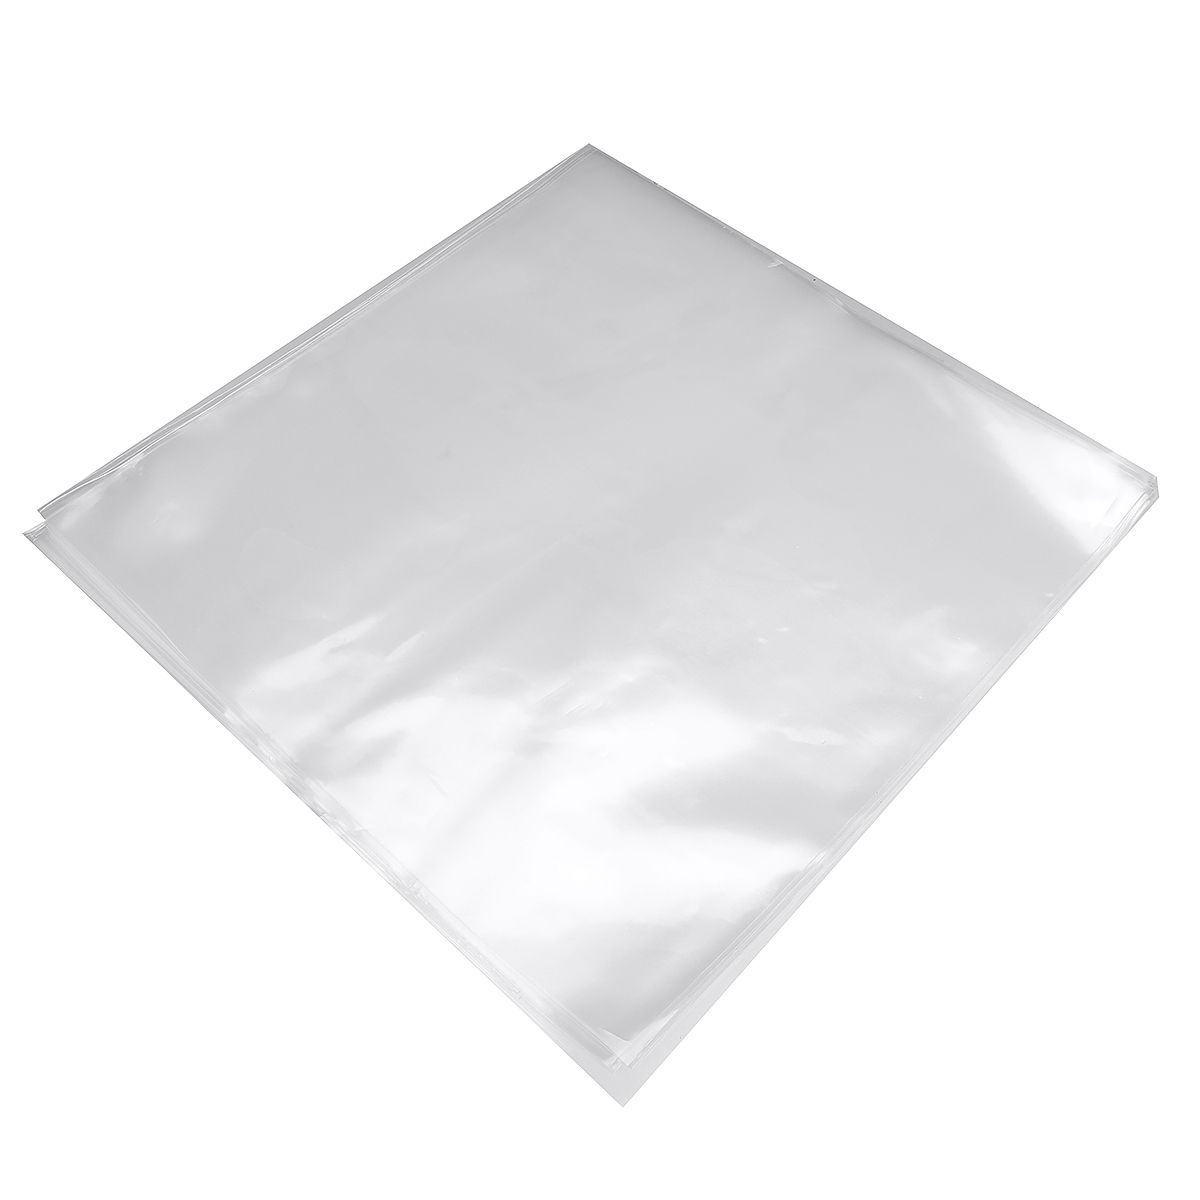 30-Flat-Open-Top-Bag-67Mil-Strong-Cover-Plastic-Vinyl-Record-Outer-Sleeves-for-12-Double--Gatefold-2-1732671